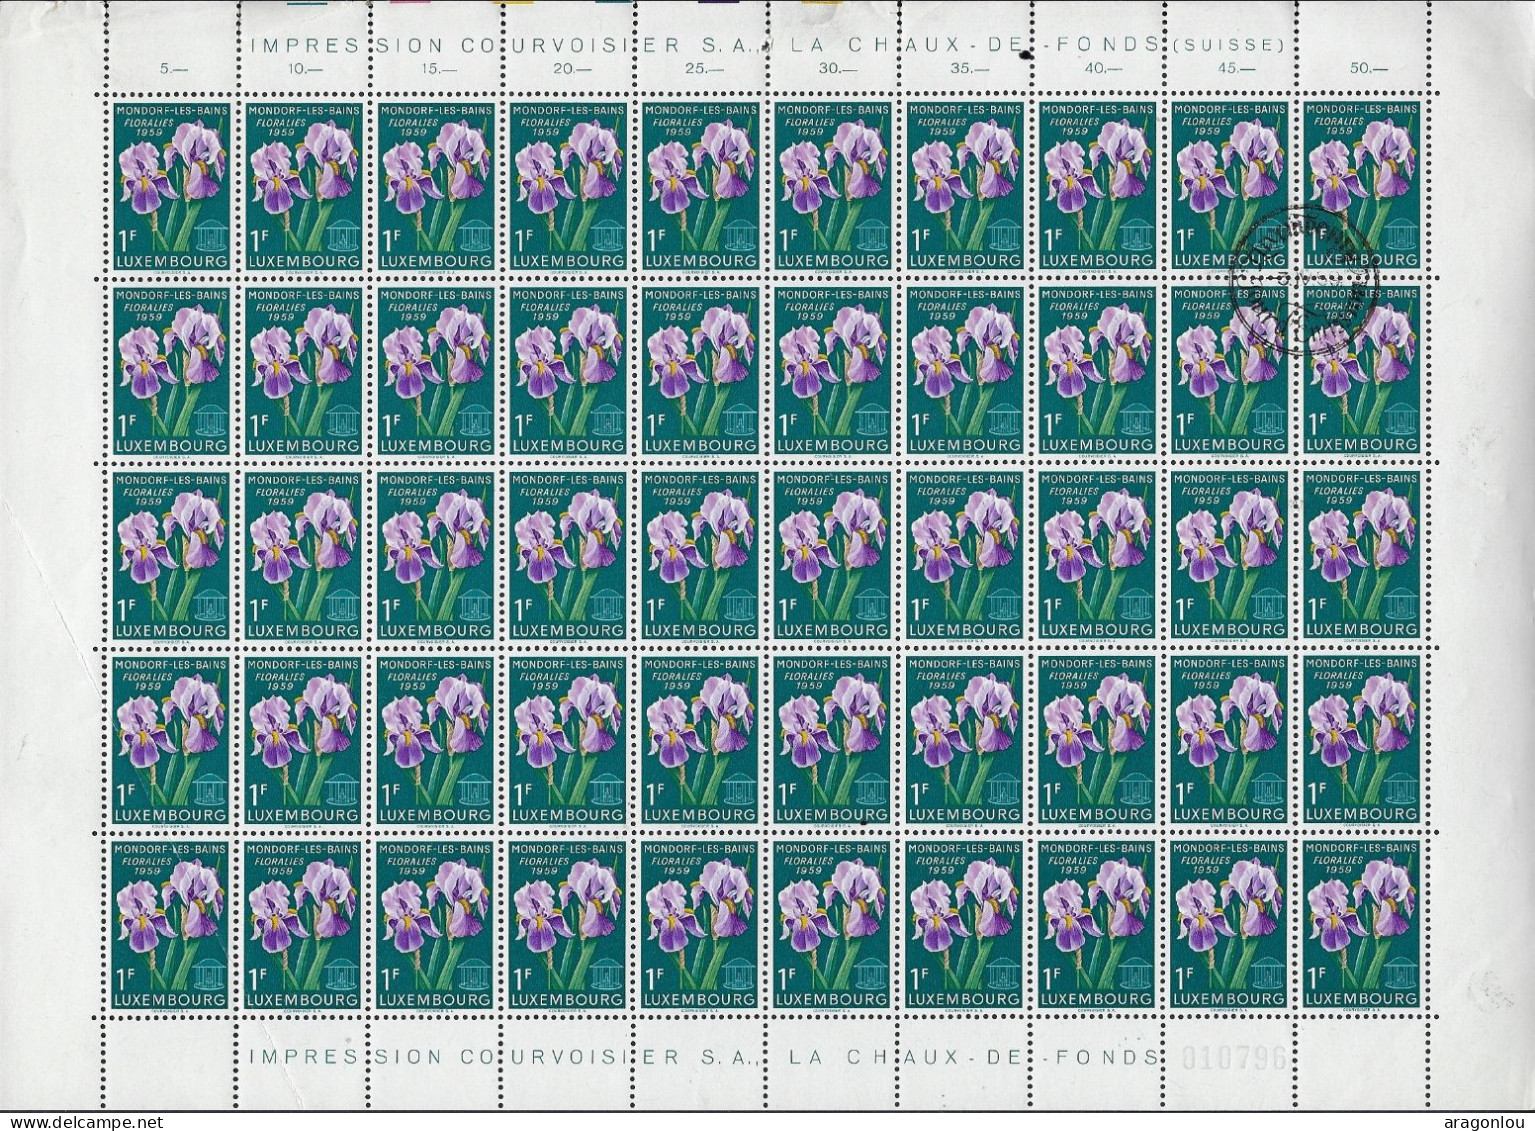 Luxembourg - Luxemburg -  Feuille à 100 Timbres 1Fr   Mondorf-les-Bains  Floralies   1959 - Full Sheets